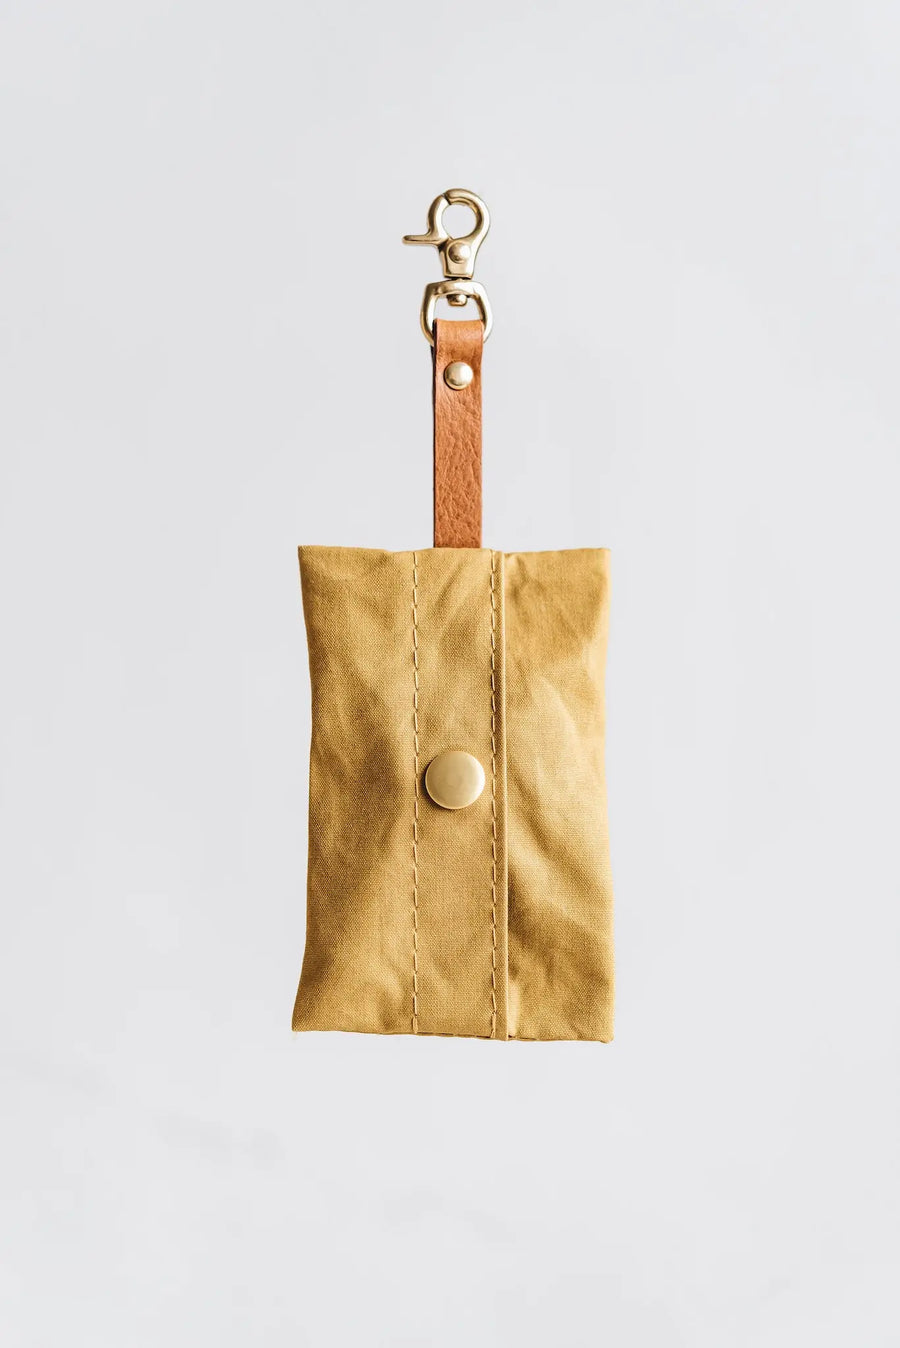 Tuscan Leather & Canvas Dog Poop Bag Holder - Various Colors